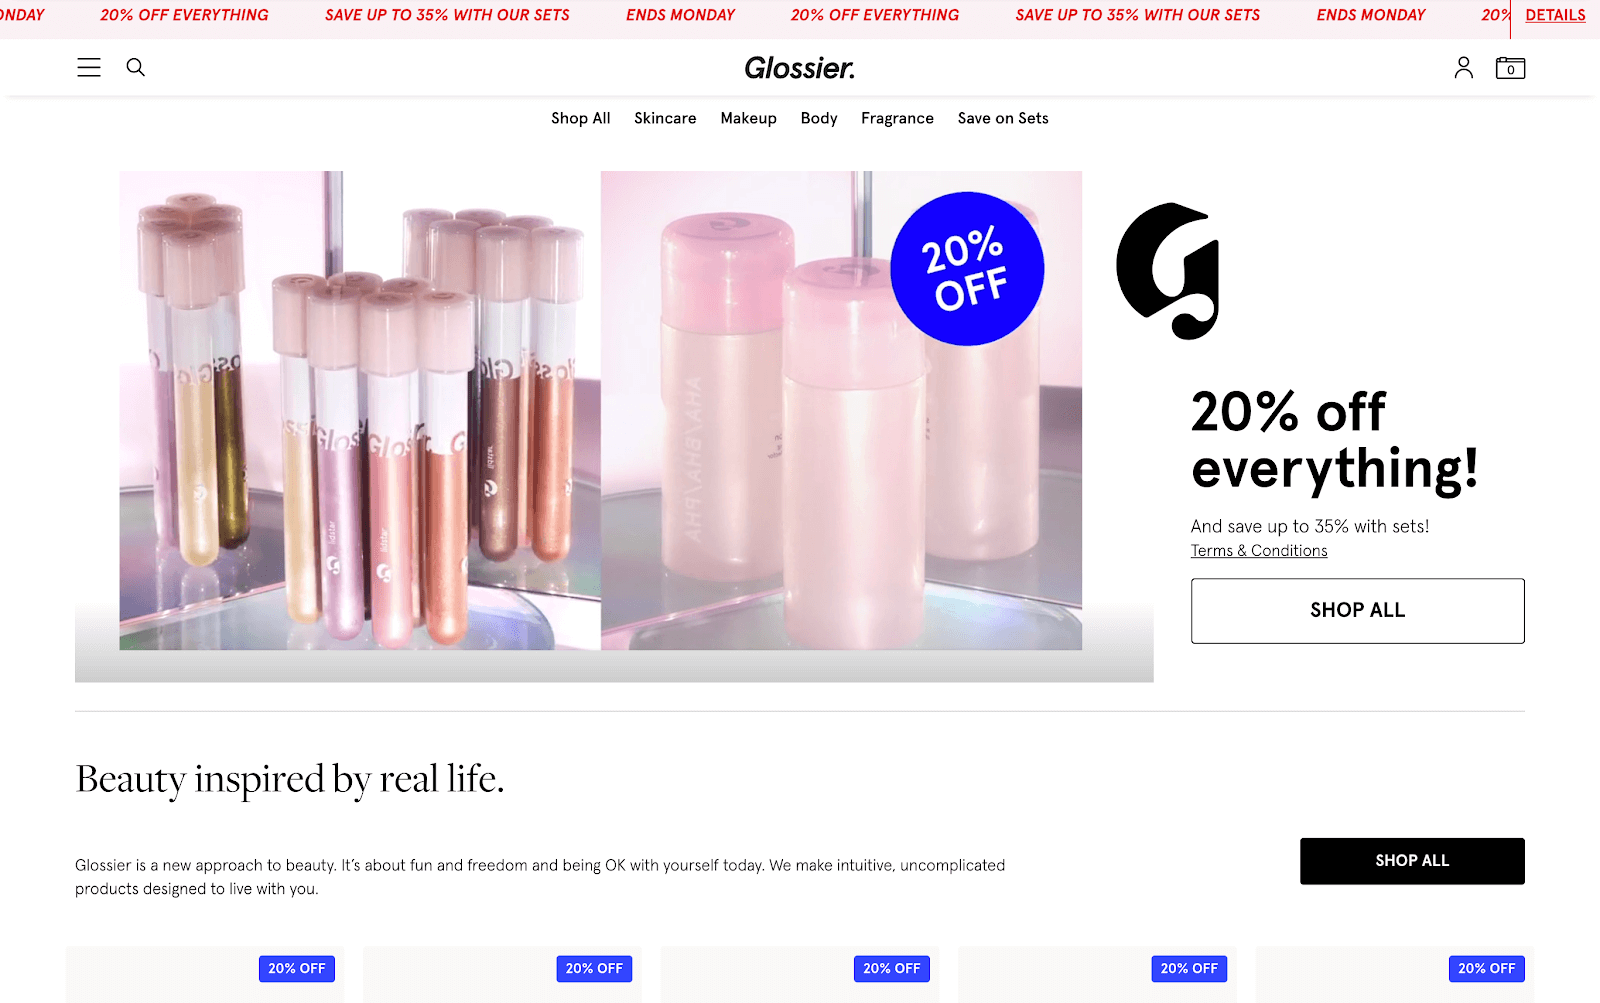 Holiday UX tips with Glossier's sticky promotion banner and product discount tags